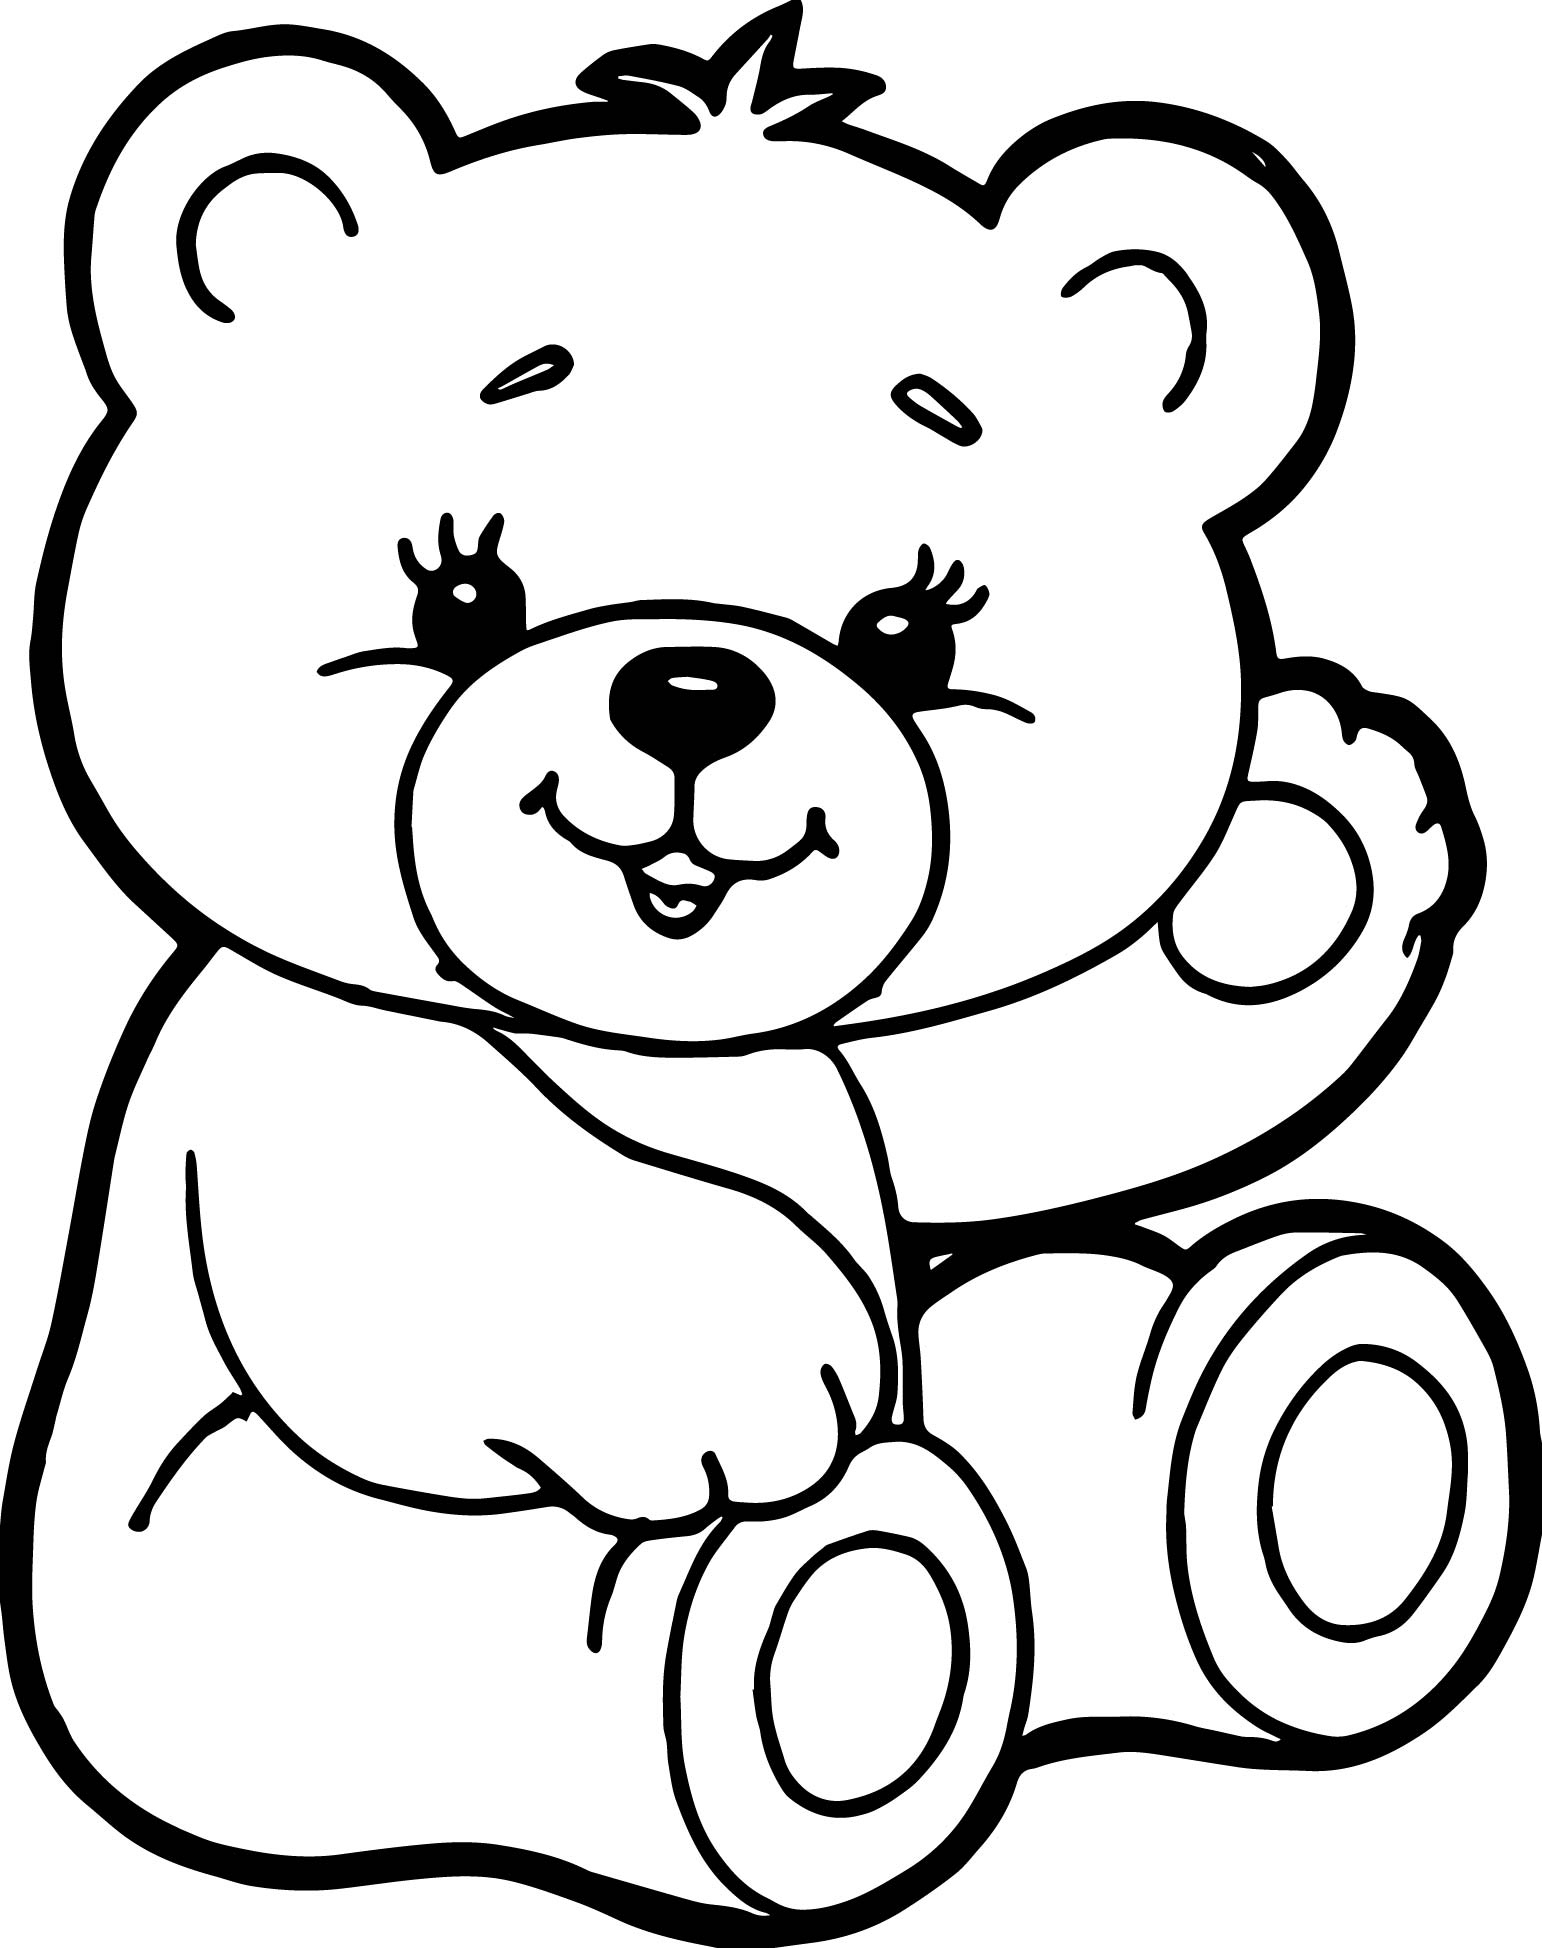 Teddy Bear Coloring Pages at GetDrawings | Free download